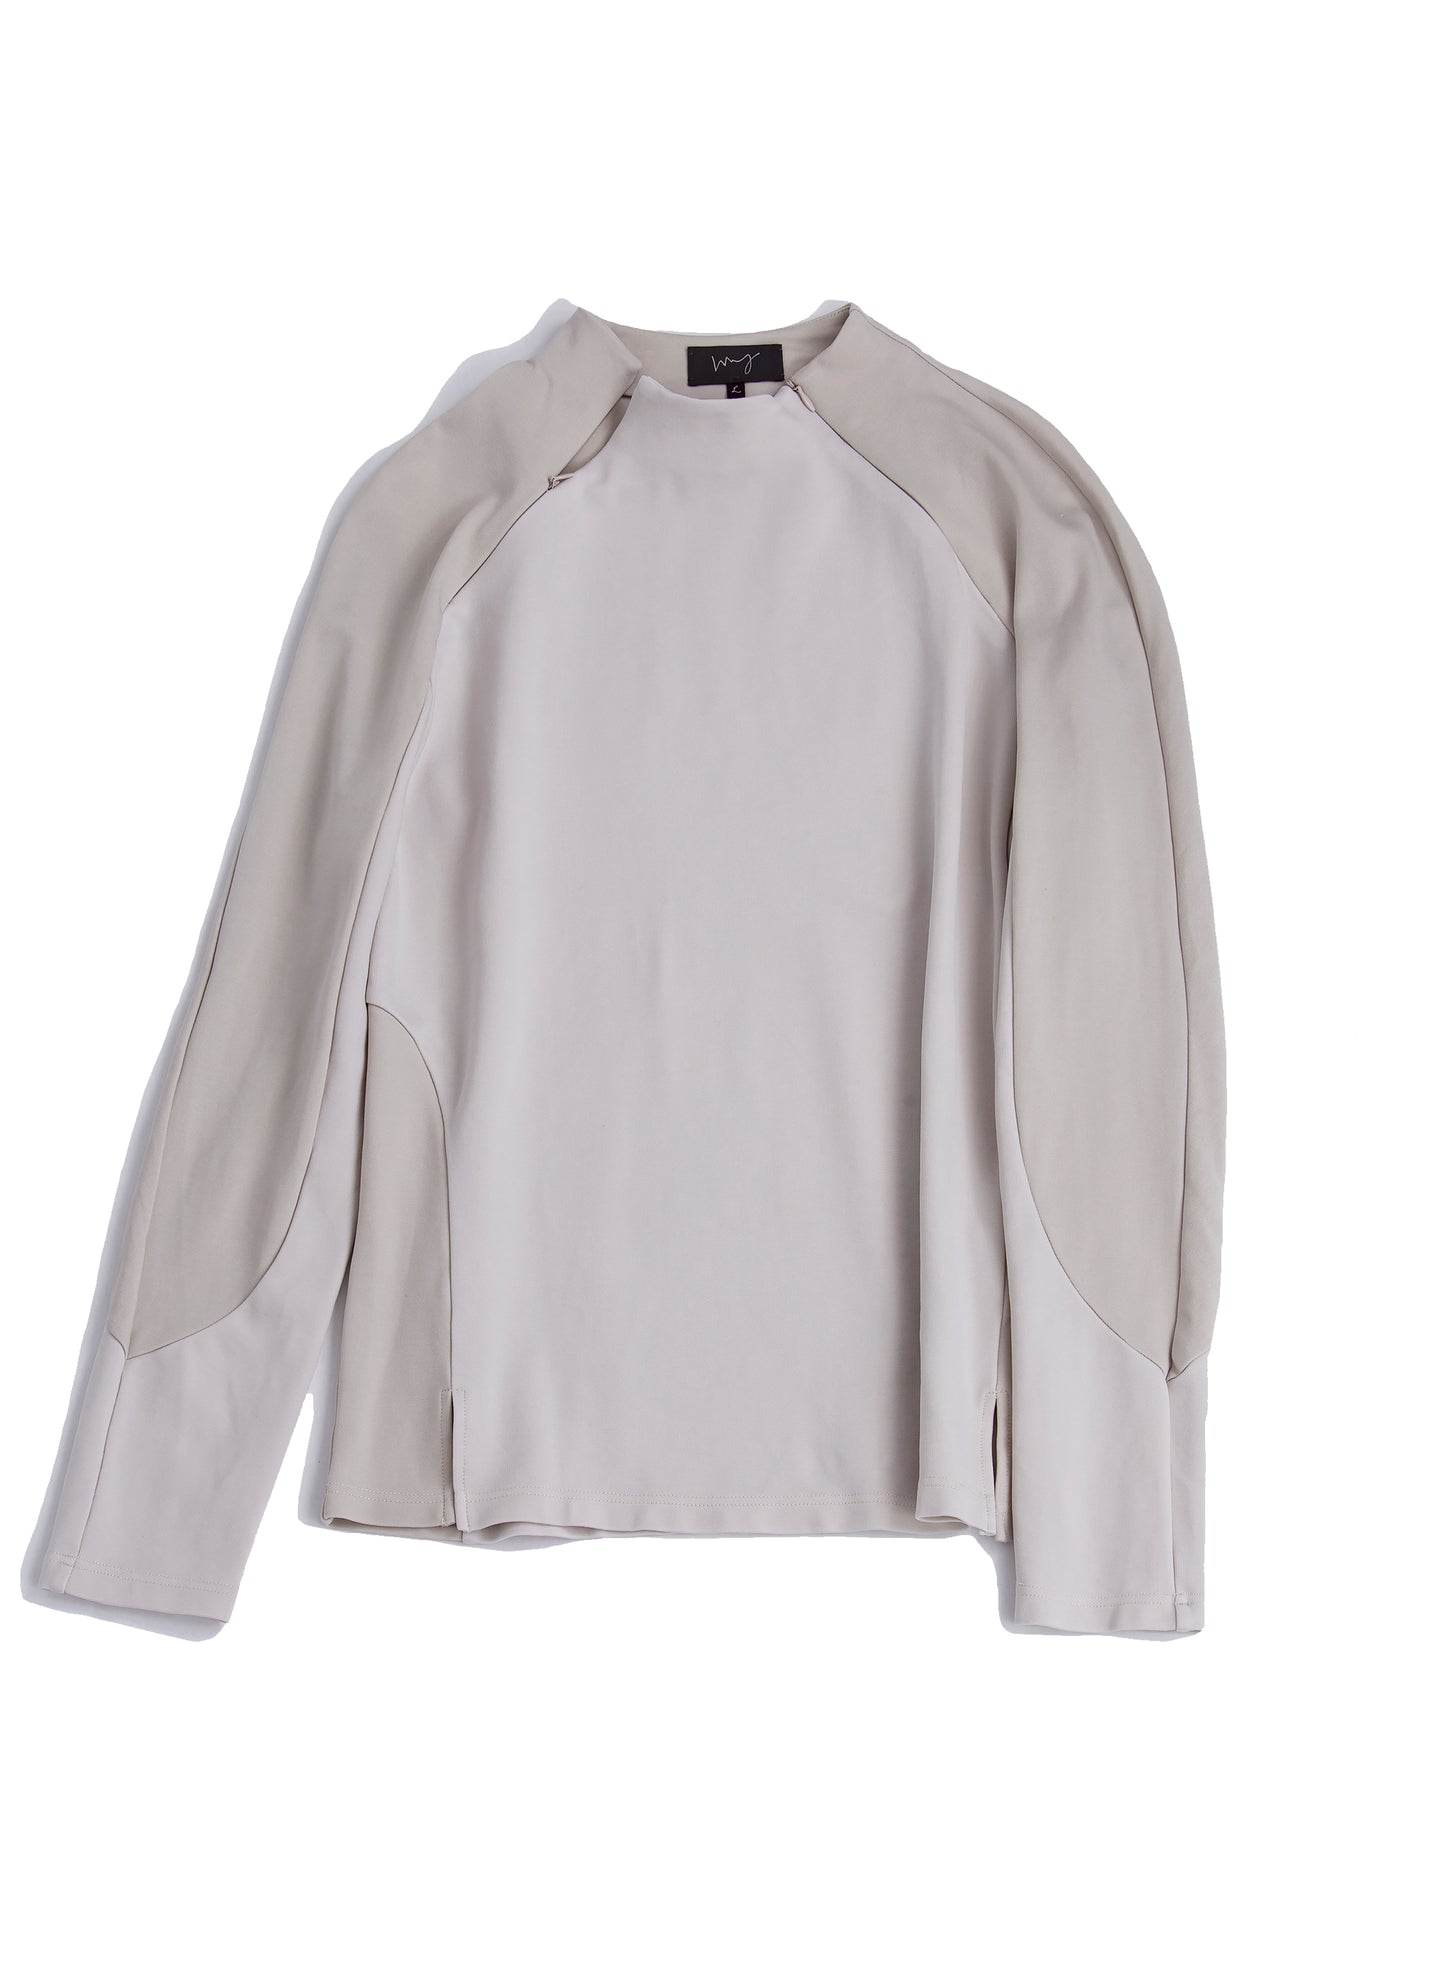 Turtle neck cycling top